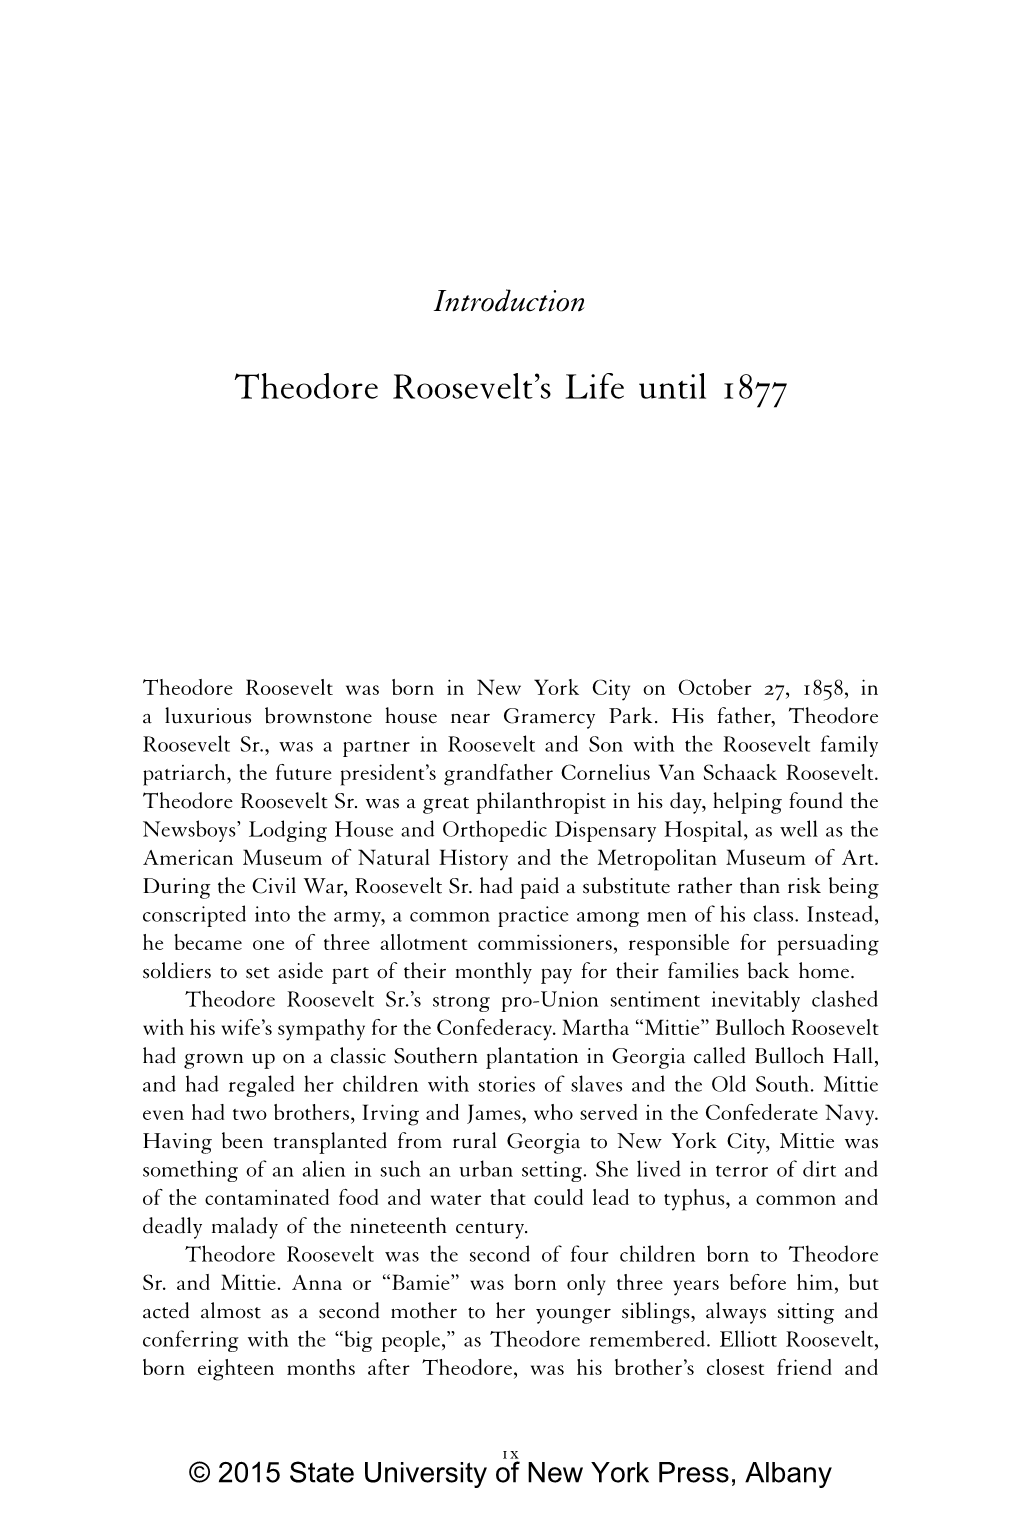 Theodore Roosevelt's Life Until 1877